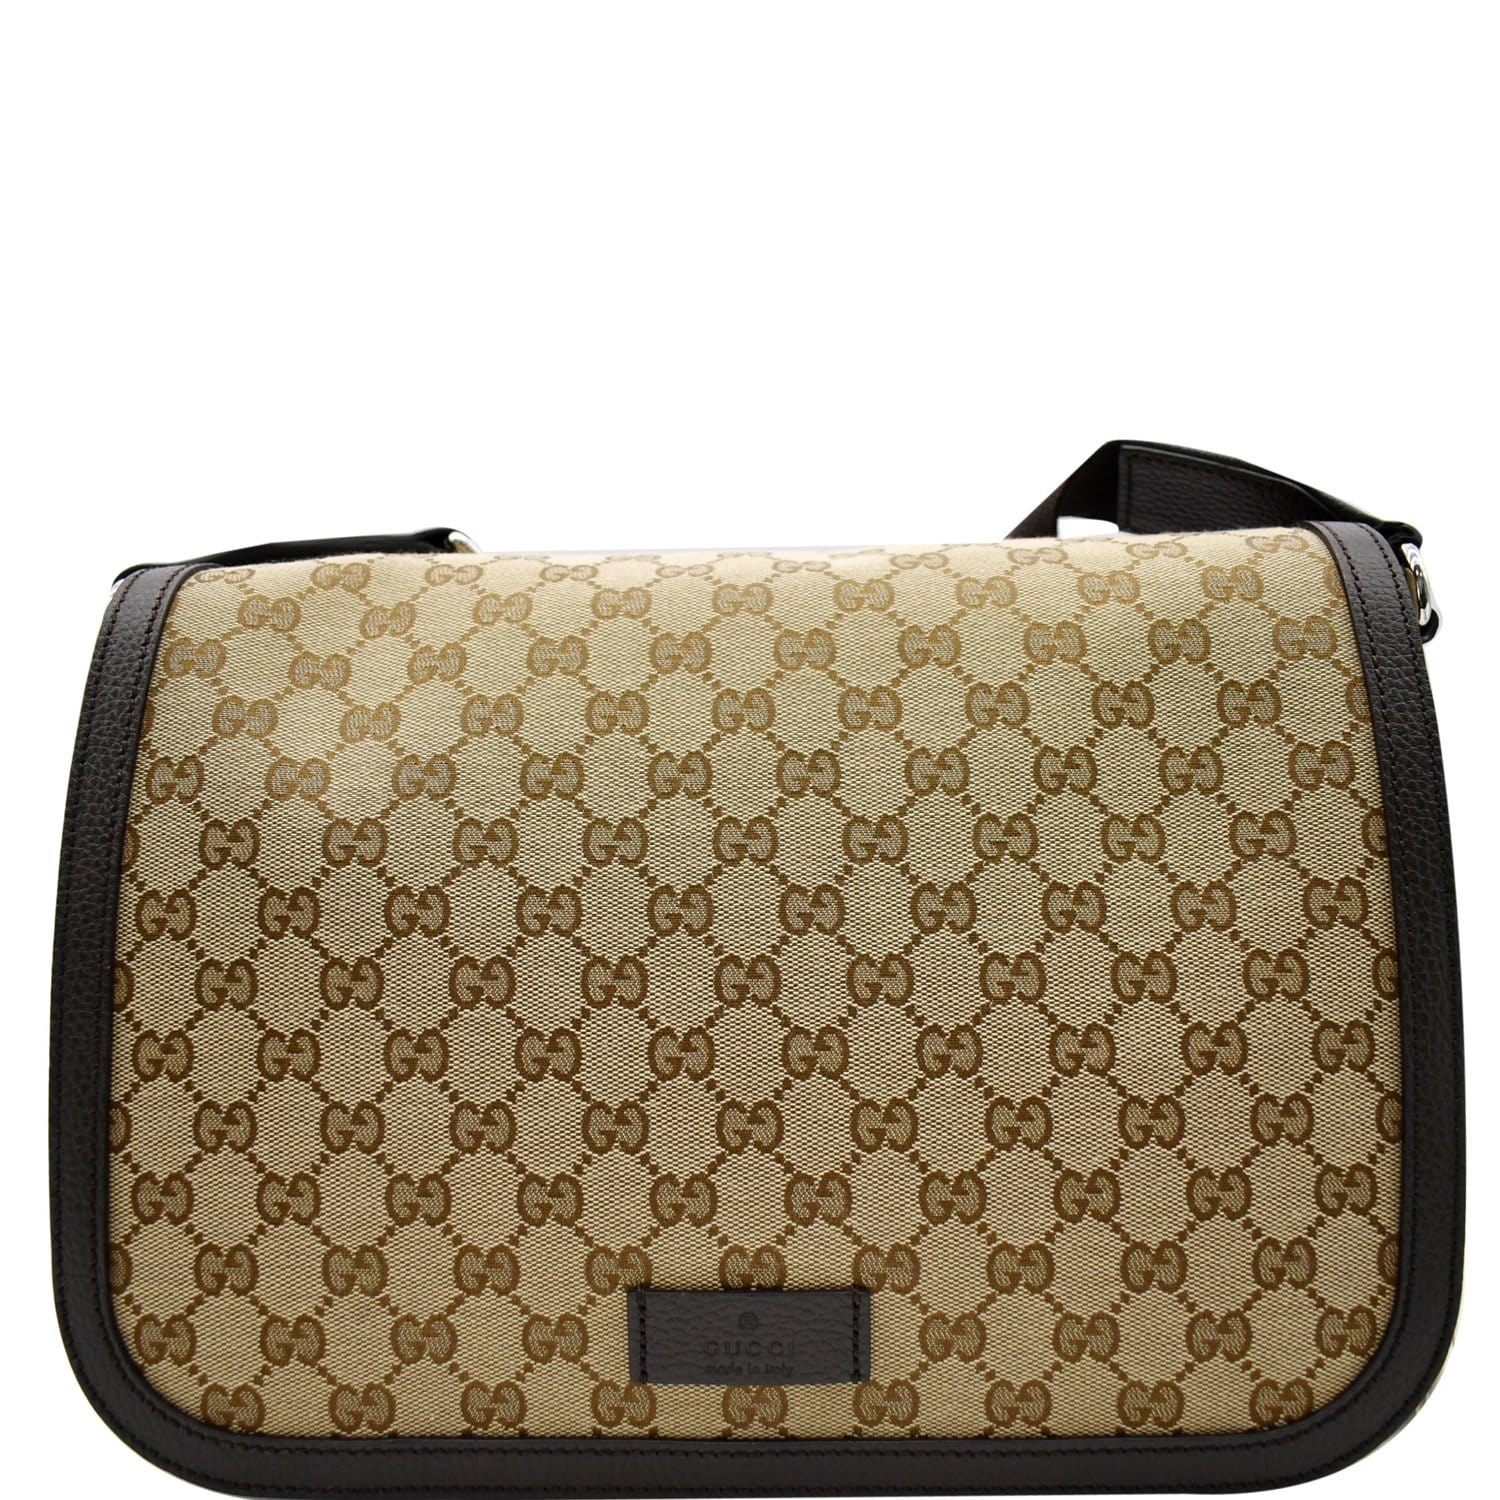 Gucci Messenger Bag GG Supreme Beige/Brown in Canvas/Leather with